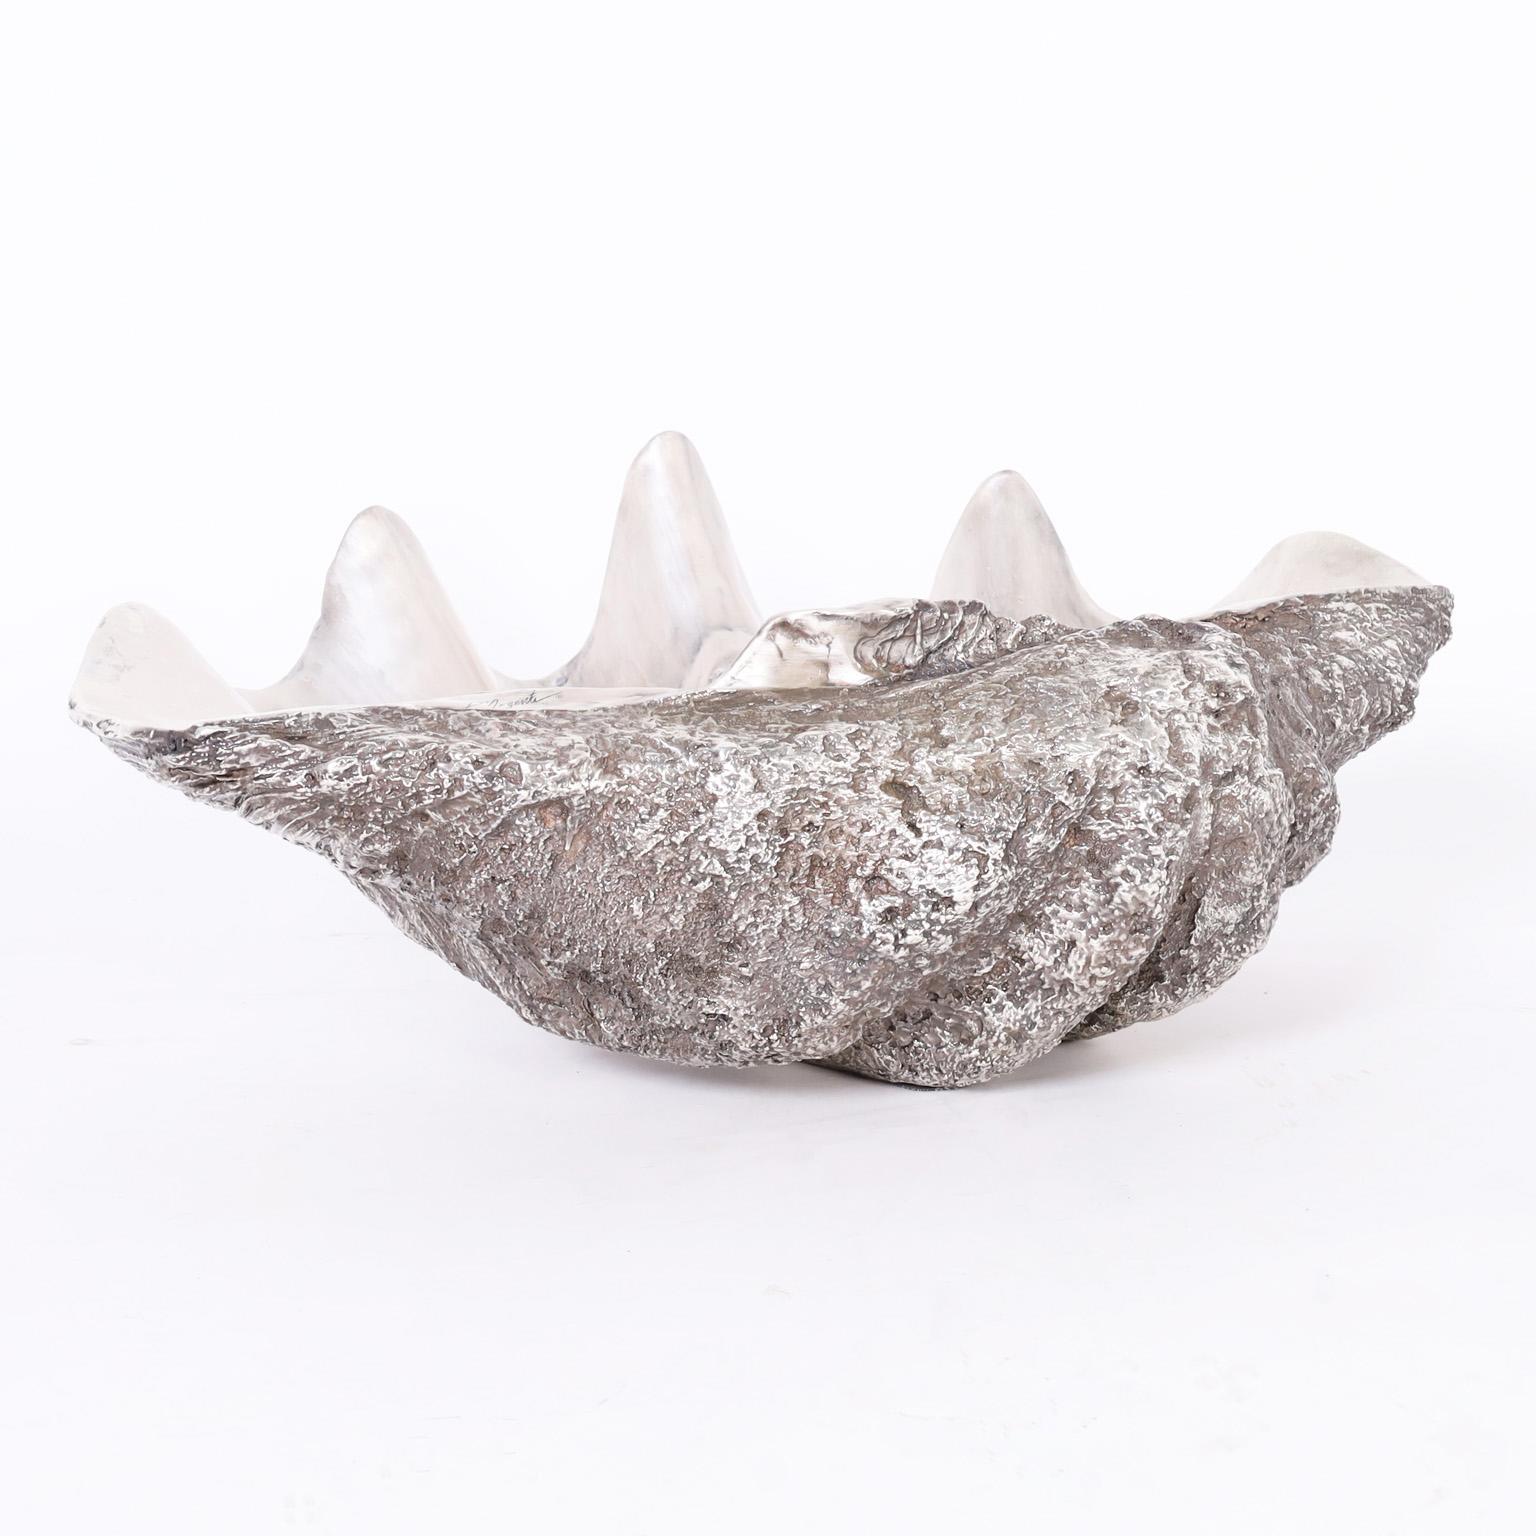 Silver Plate Life Size Giant Clam Shell Sculpture For Sale 2